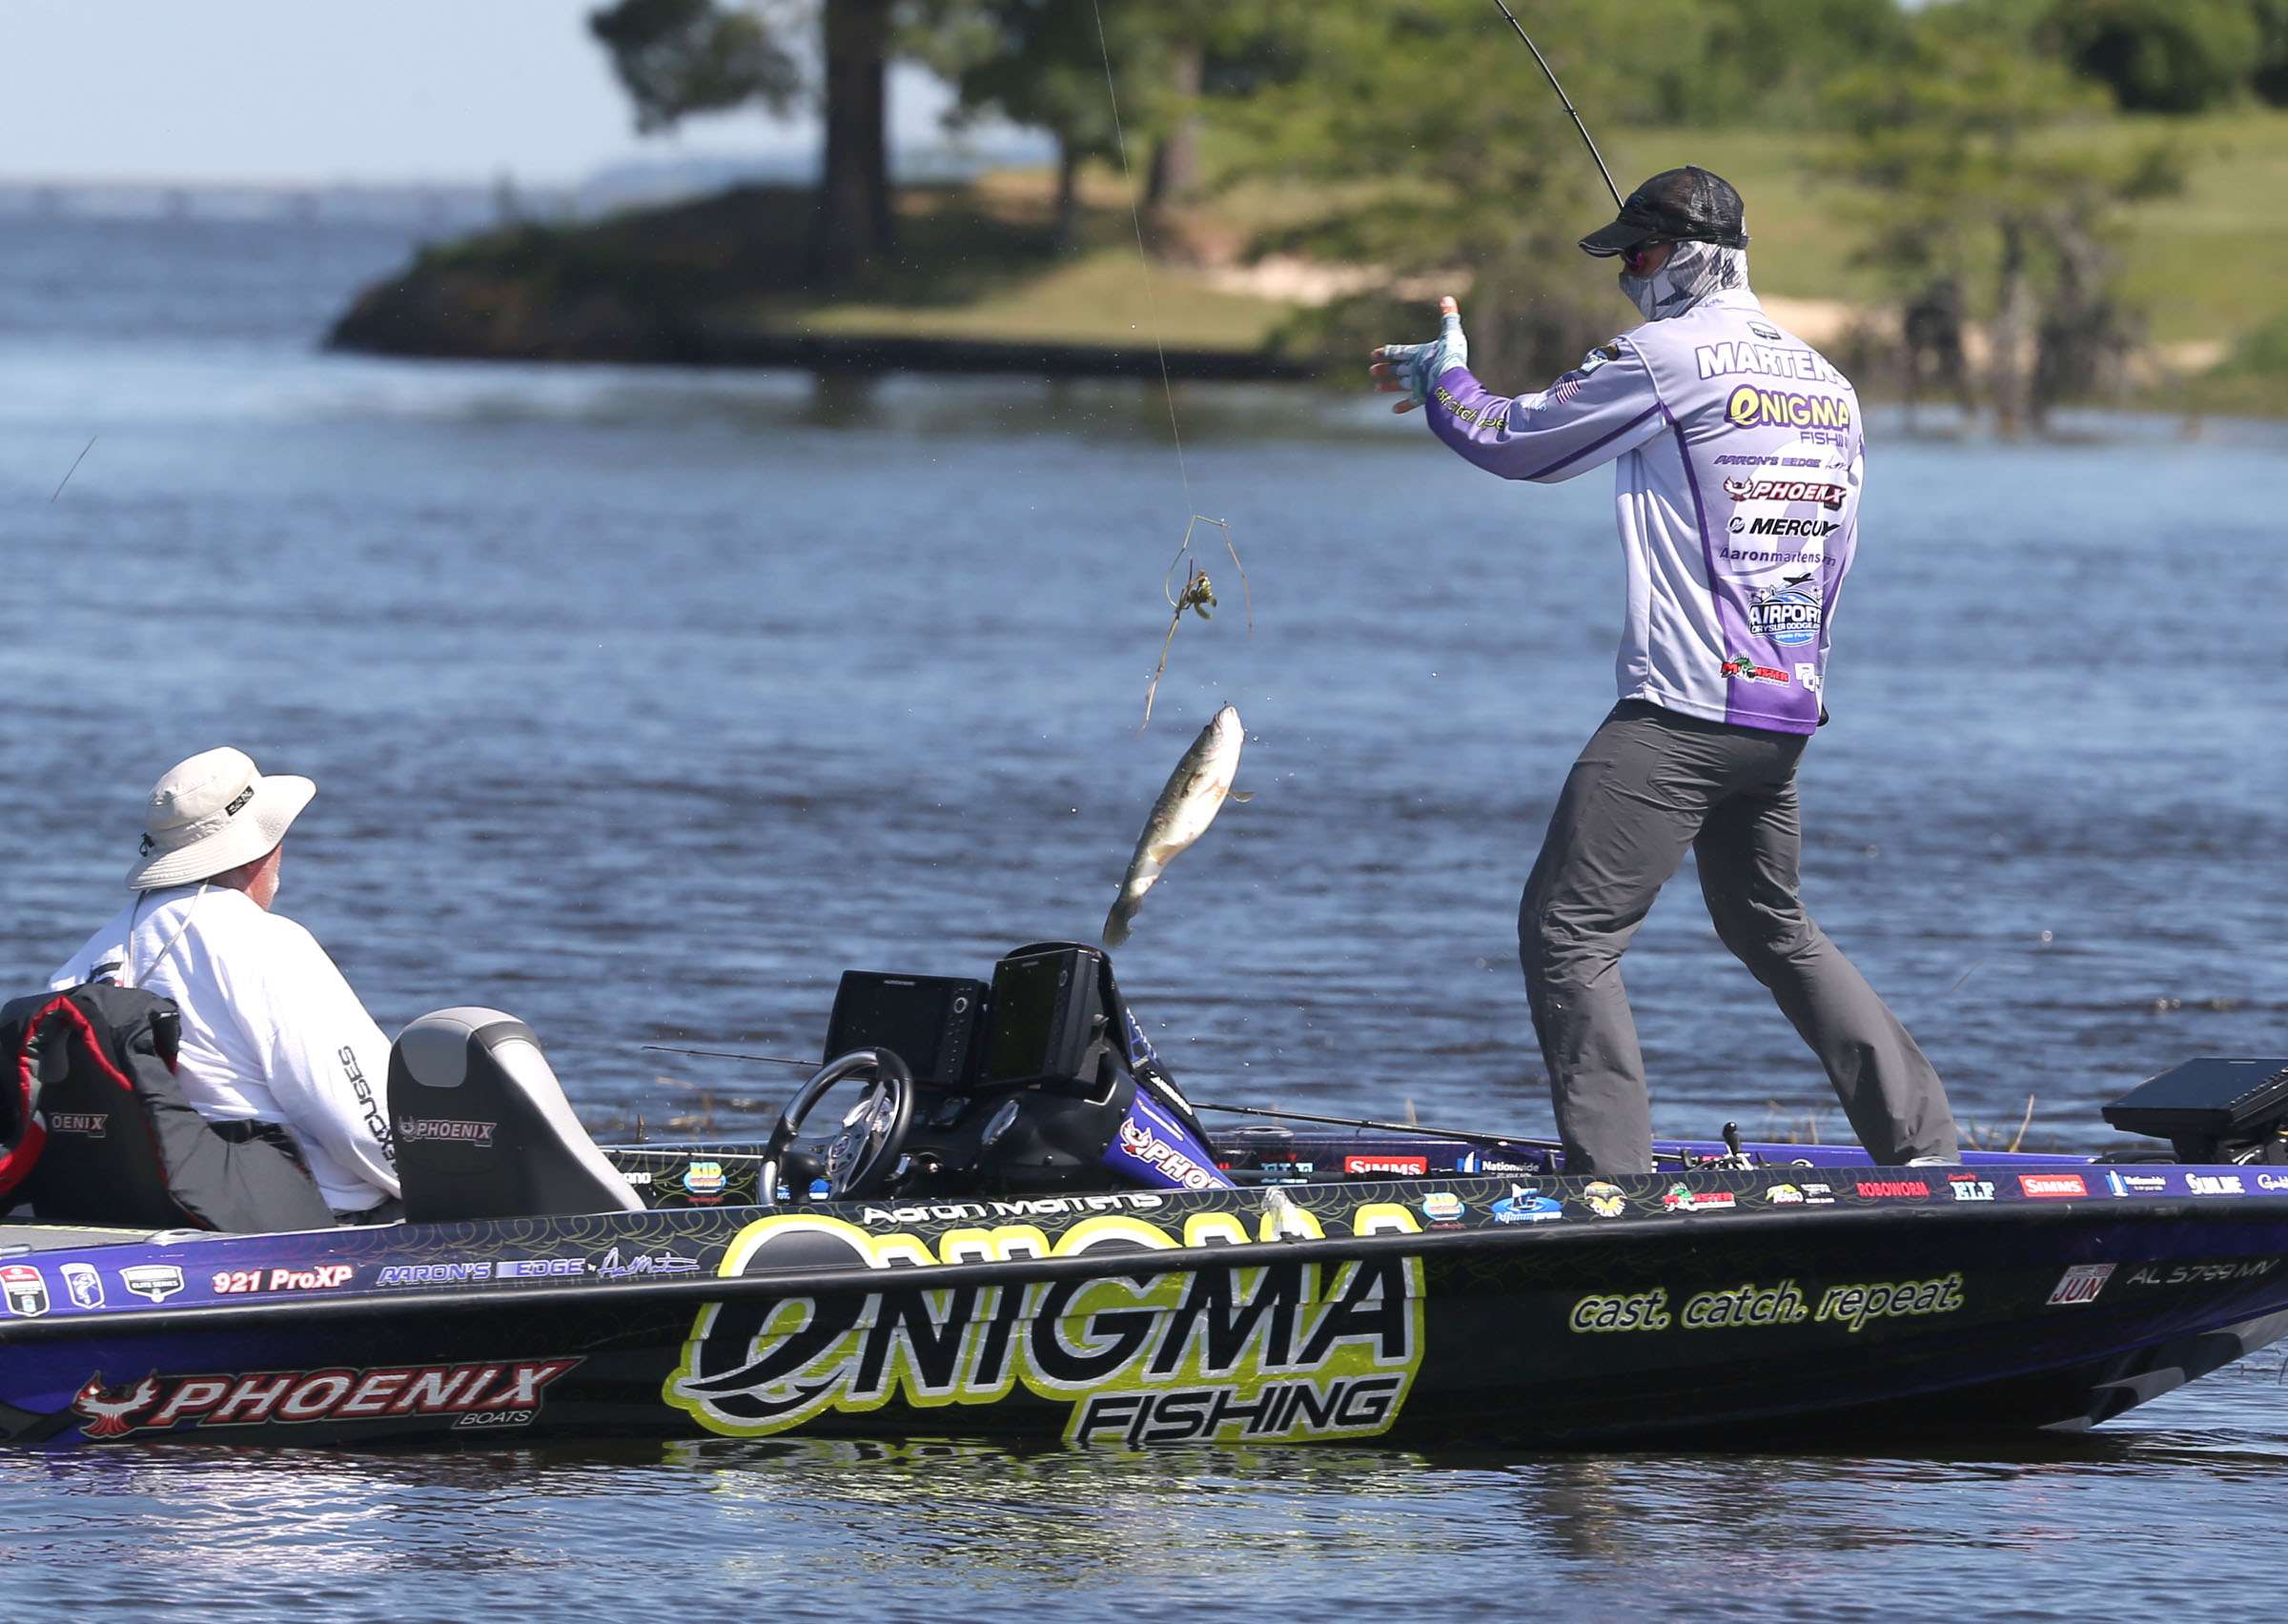 No doubt the Elites will find the fish again in 2017 at what was recently declared the #1 bass lake in U.S. for the second year in a row by <i>Bassmaster</i> Magazine.